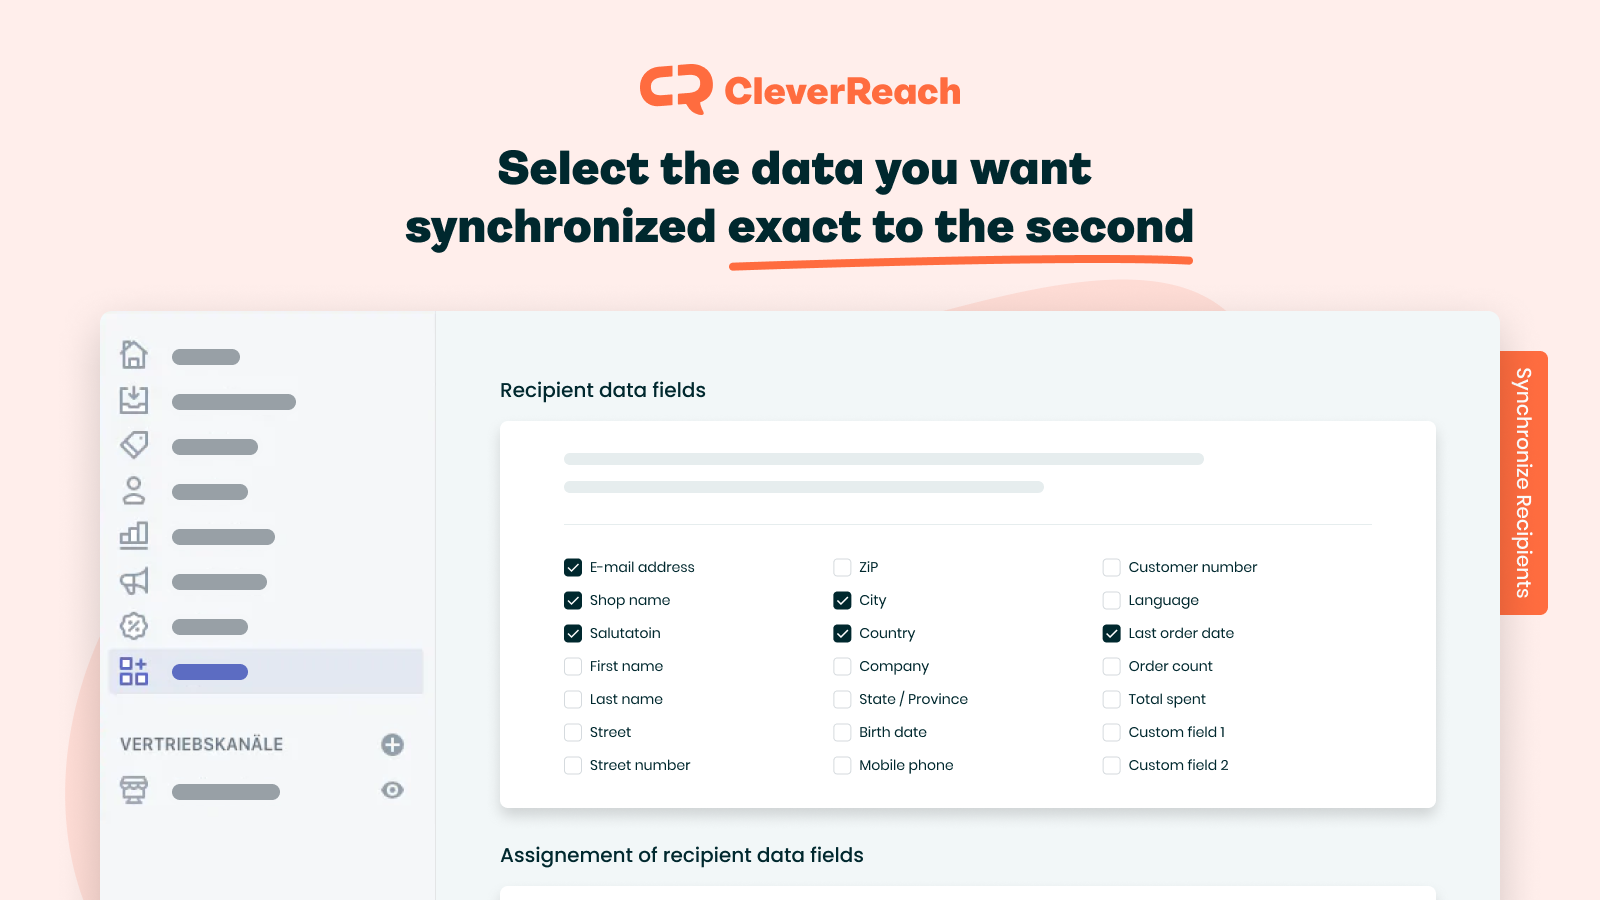 Select the data you want synchronized exact to the second